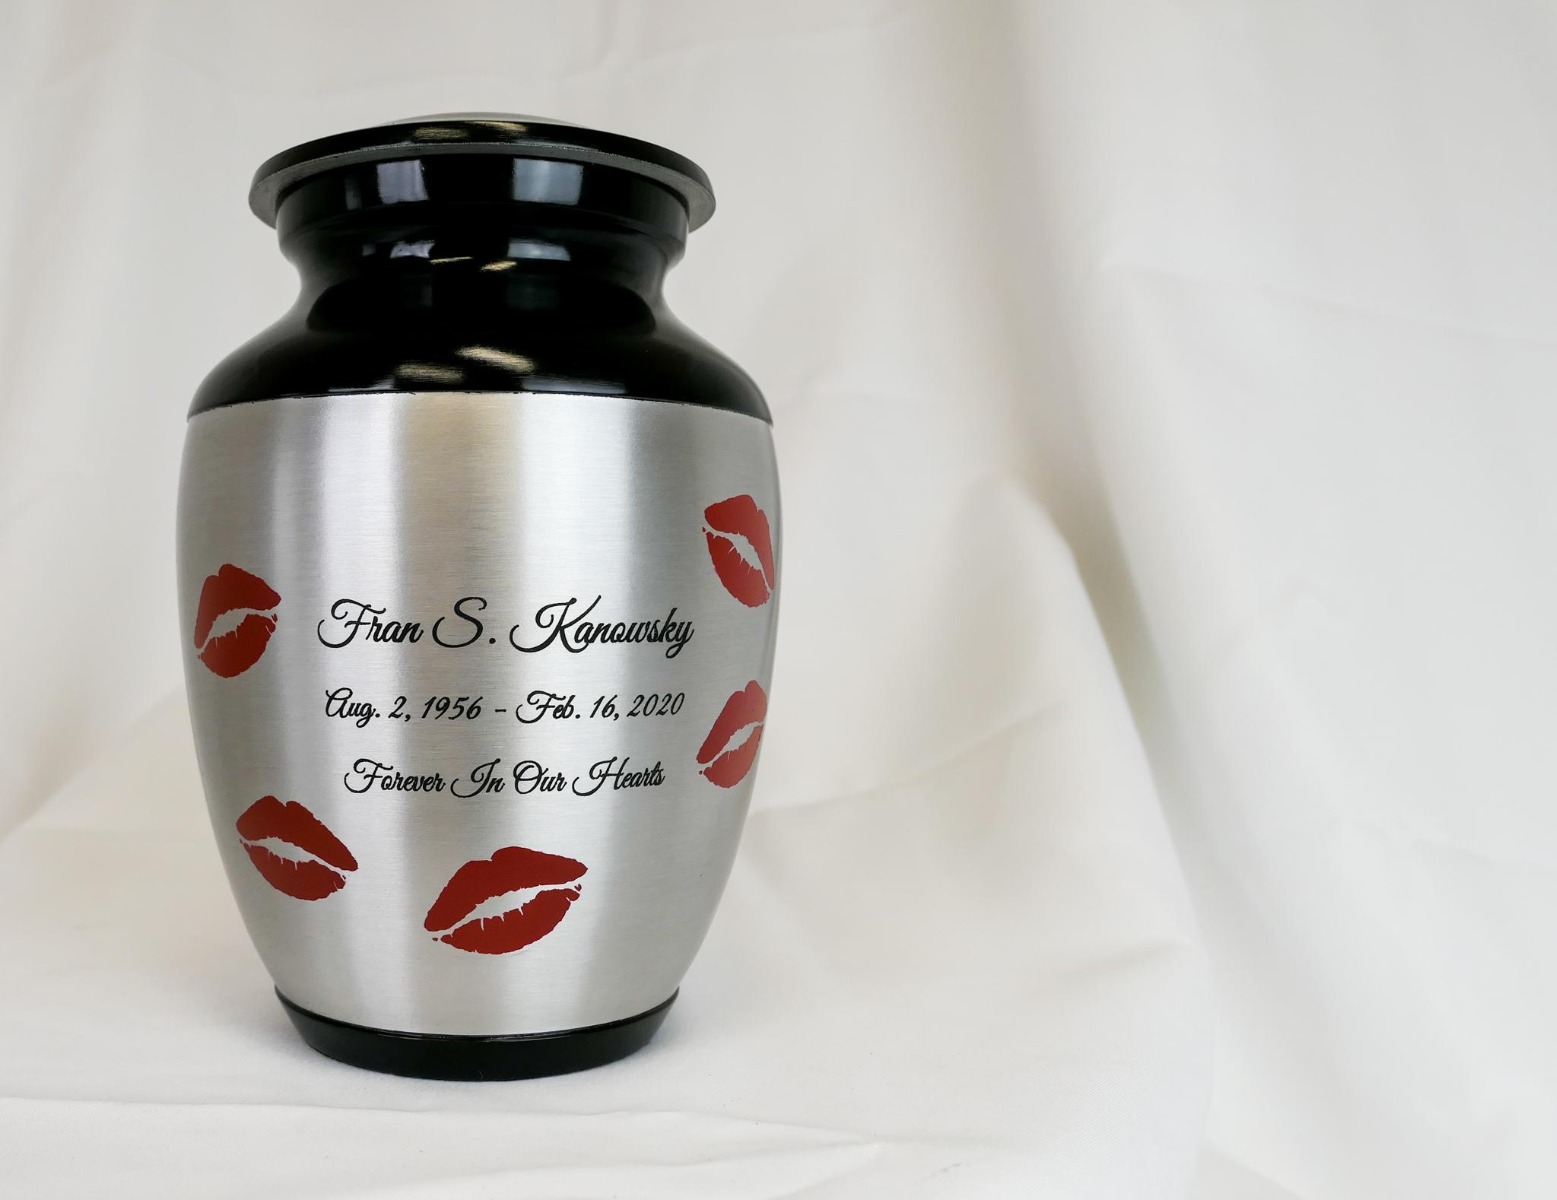 Engraved metal cremation urn with lipstick kiss marks.